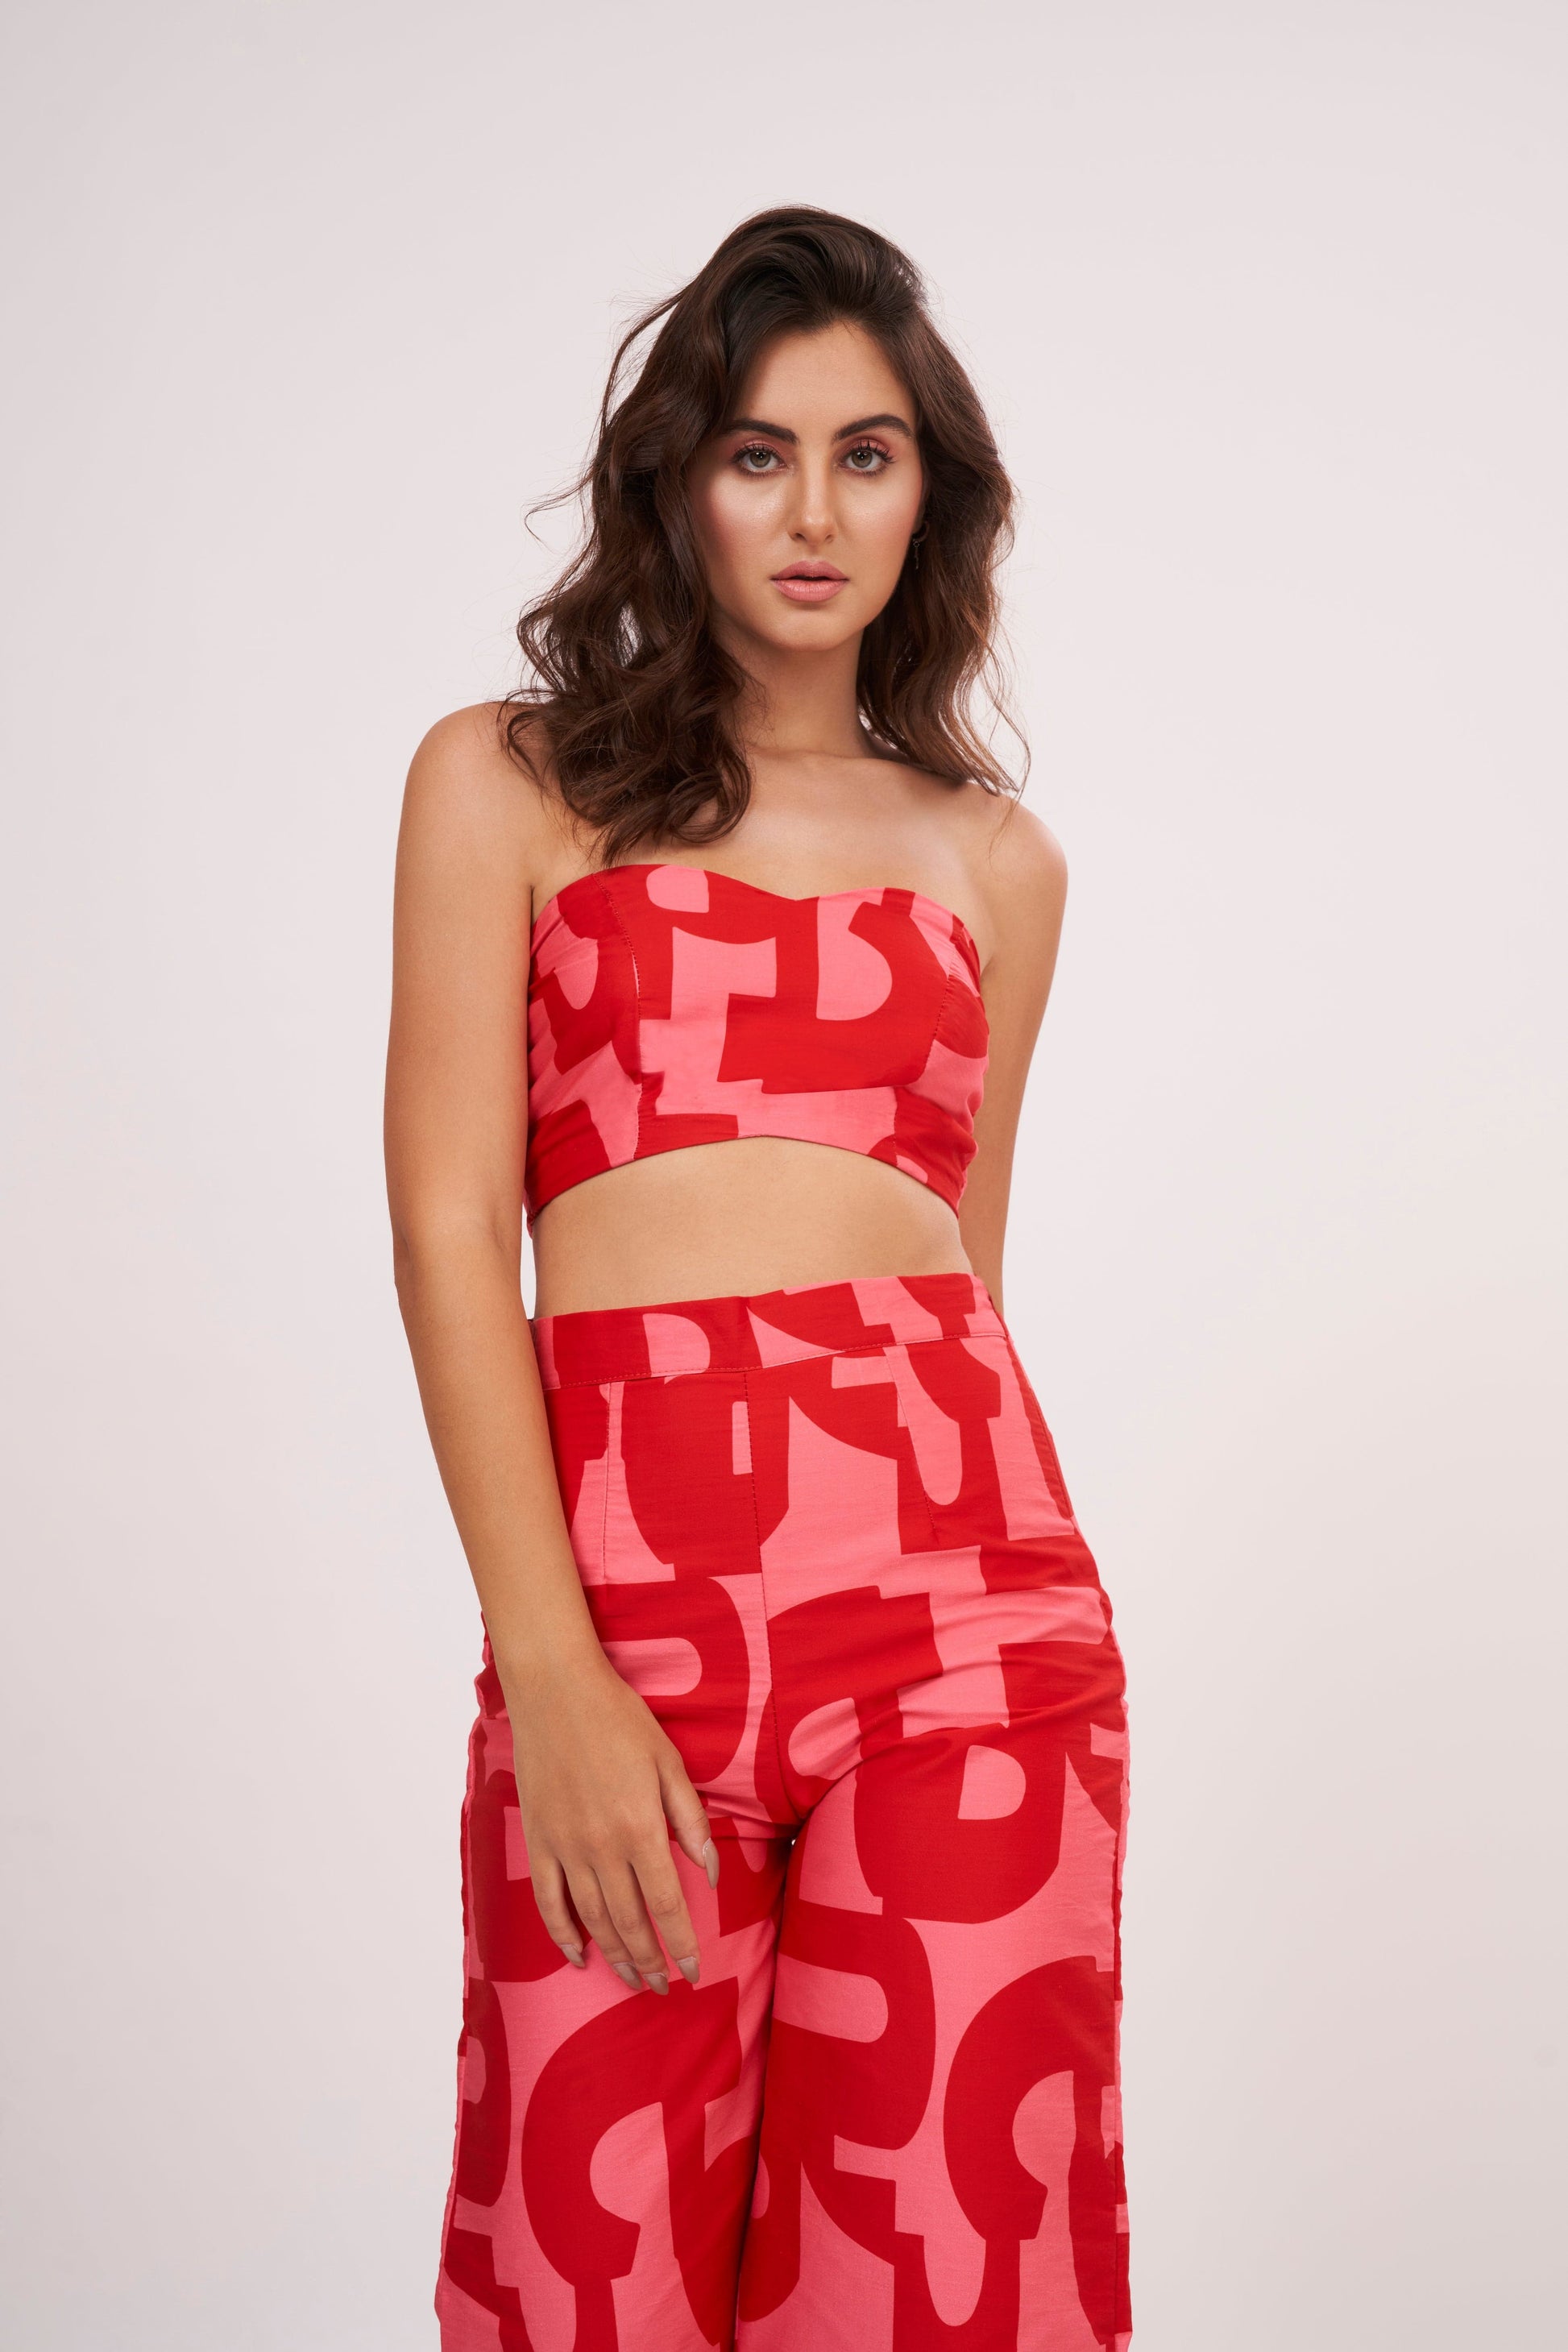 Red Co Ord tube crop top in lightweight cotton satin, featuring pink-red geometric print. Snug yet comfortable fit flatters the figure, perfect for summer days.